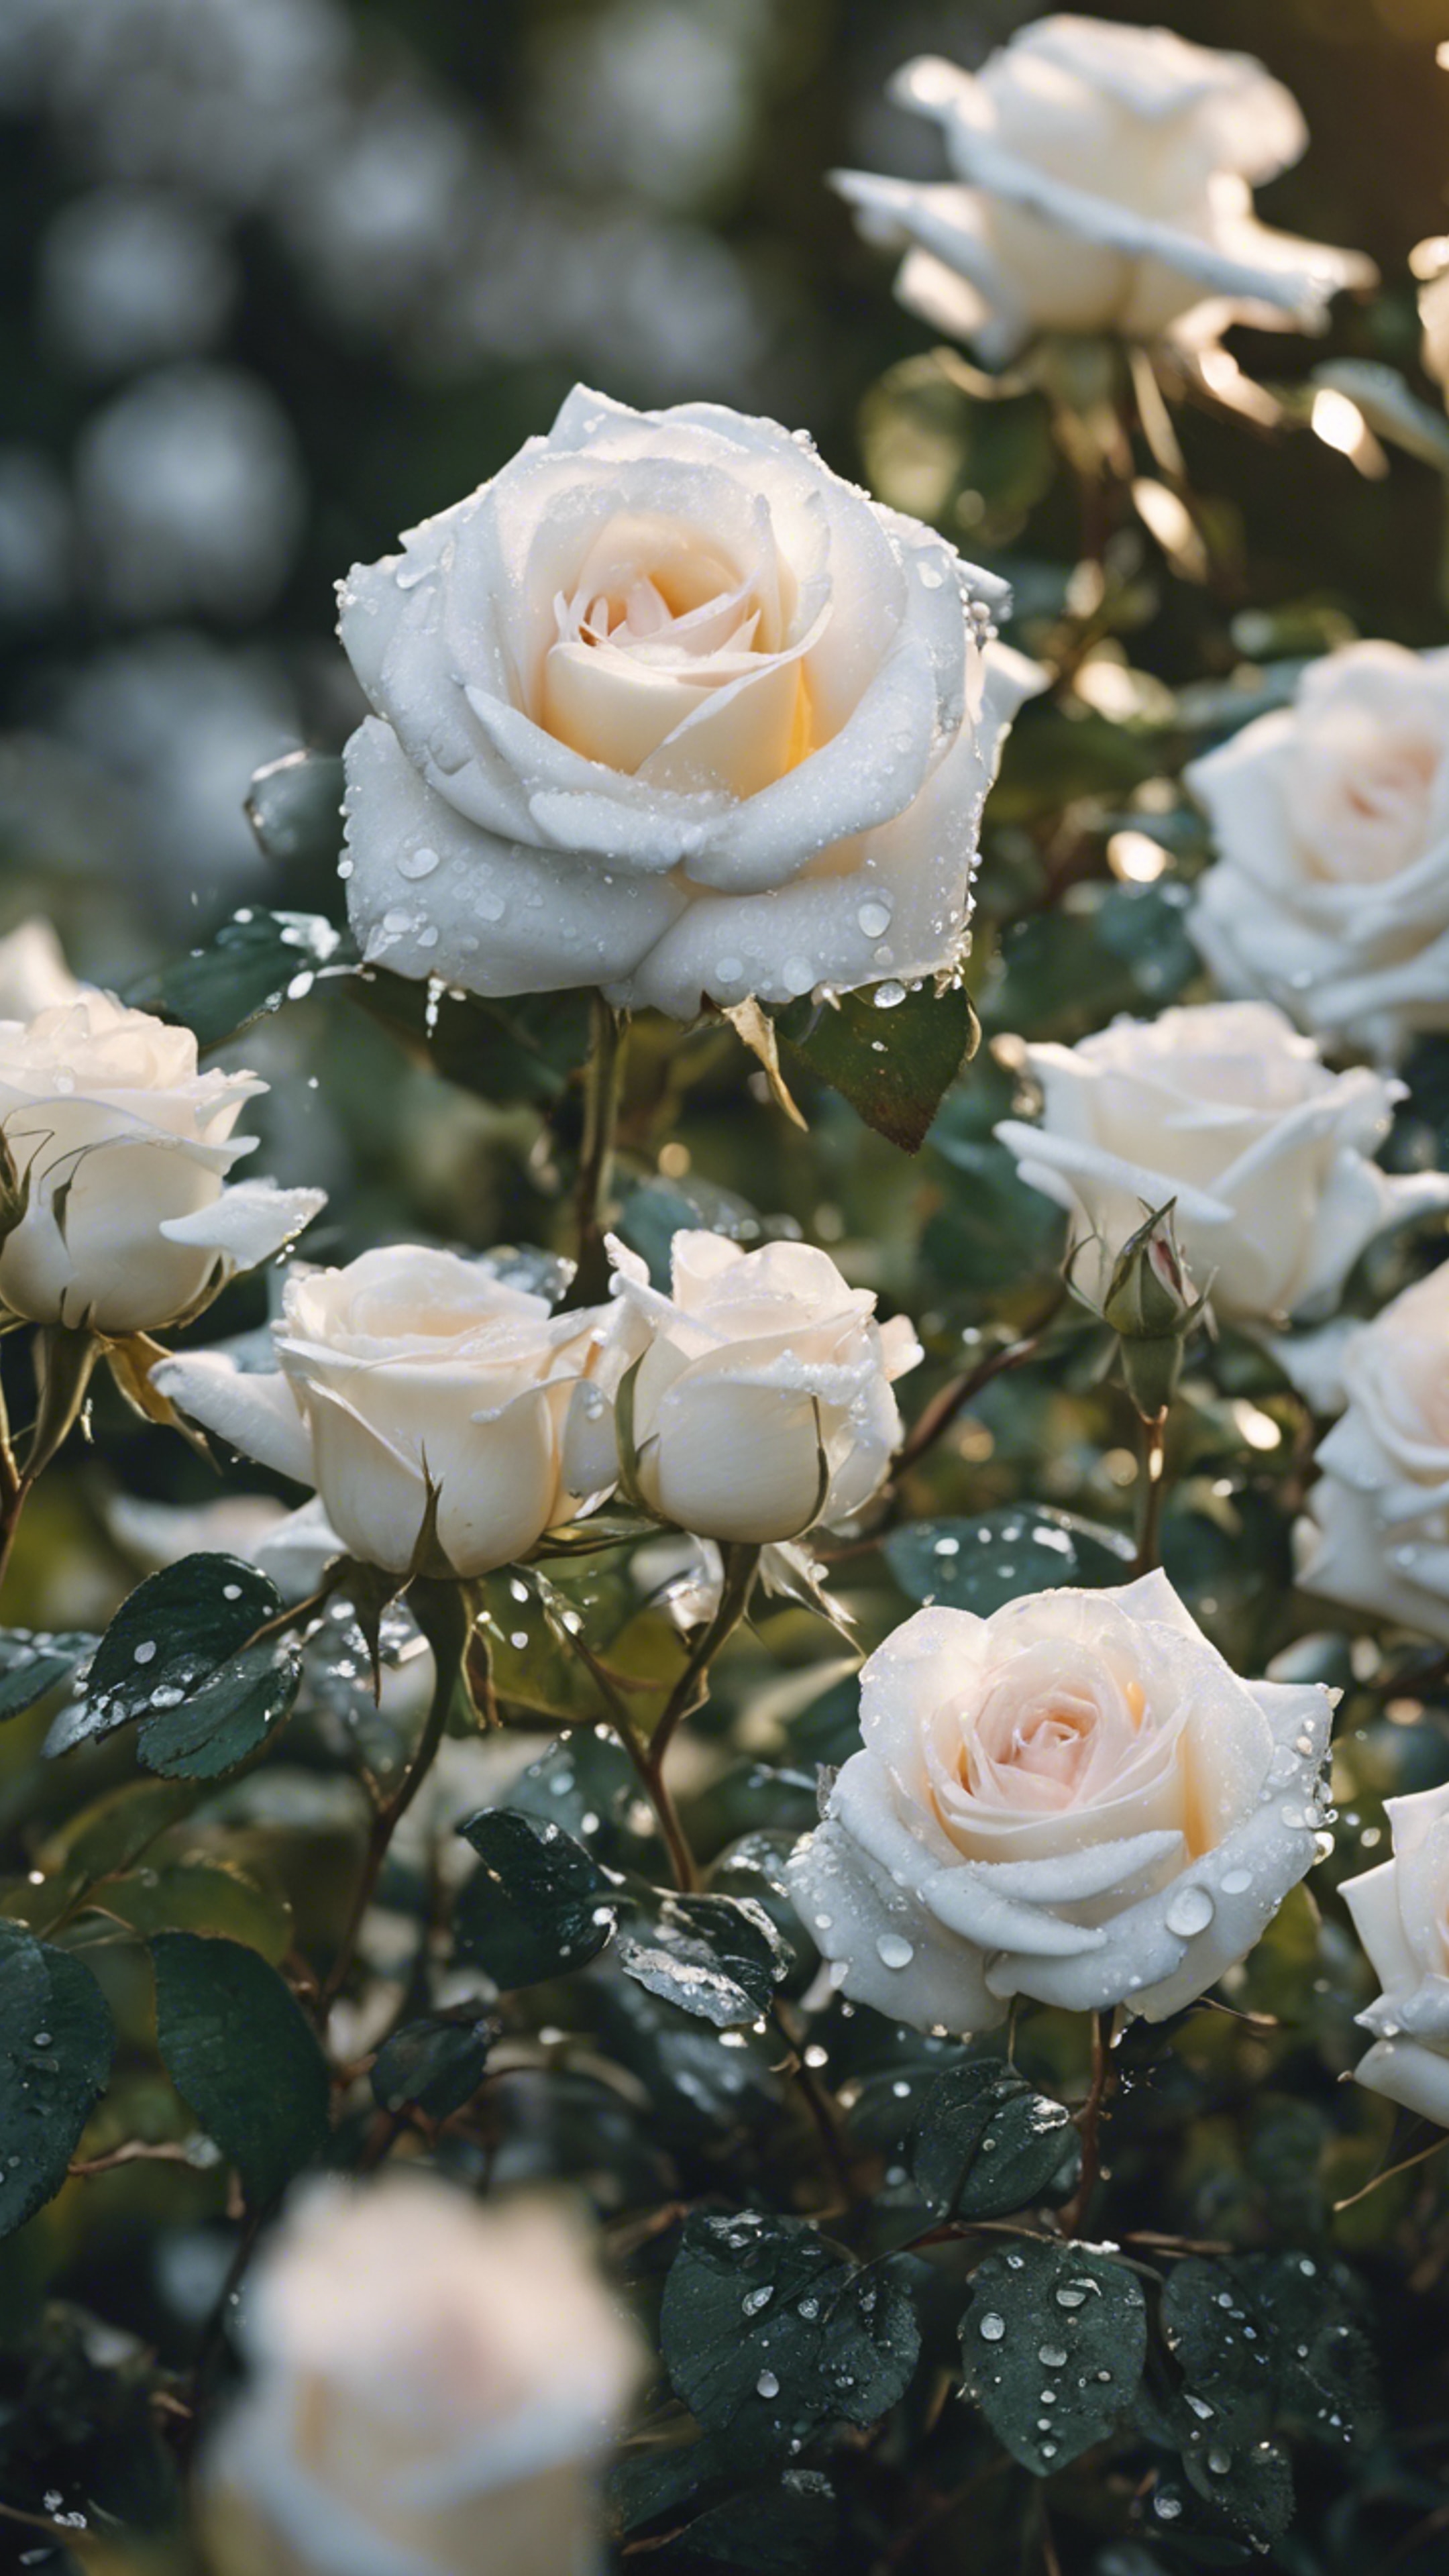 White roses covered in silver morning dew in a lush rose garden. ផ្ទាំង​រូបភាព[67c2c5bc62874412a2b6]